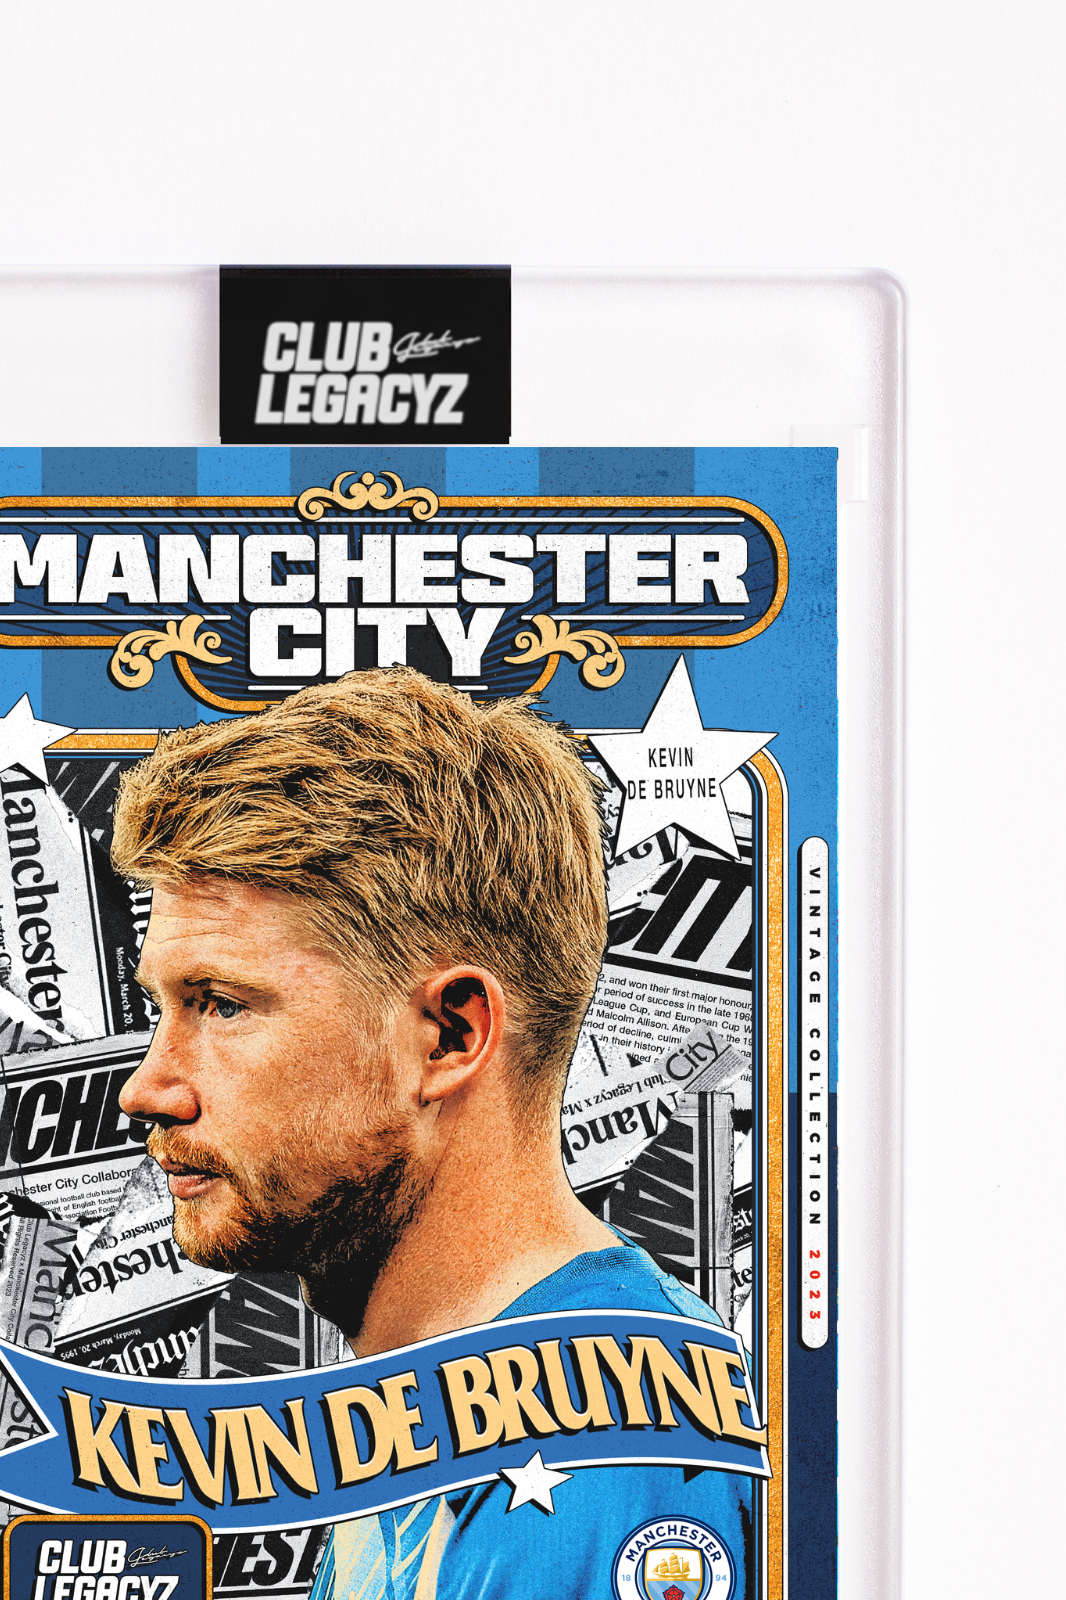 Manchester City - Kevin de Bruyne Retro Icon limited to 100